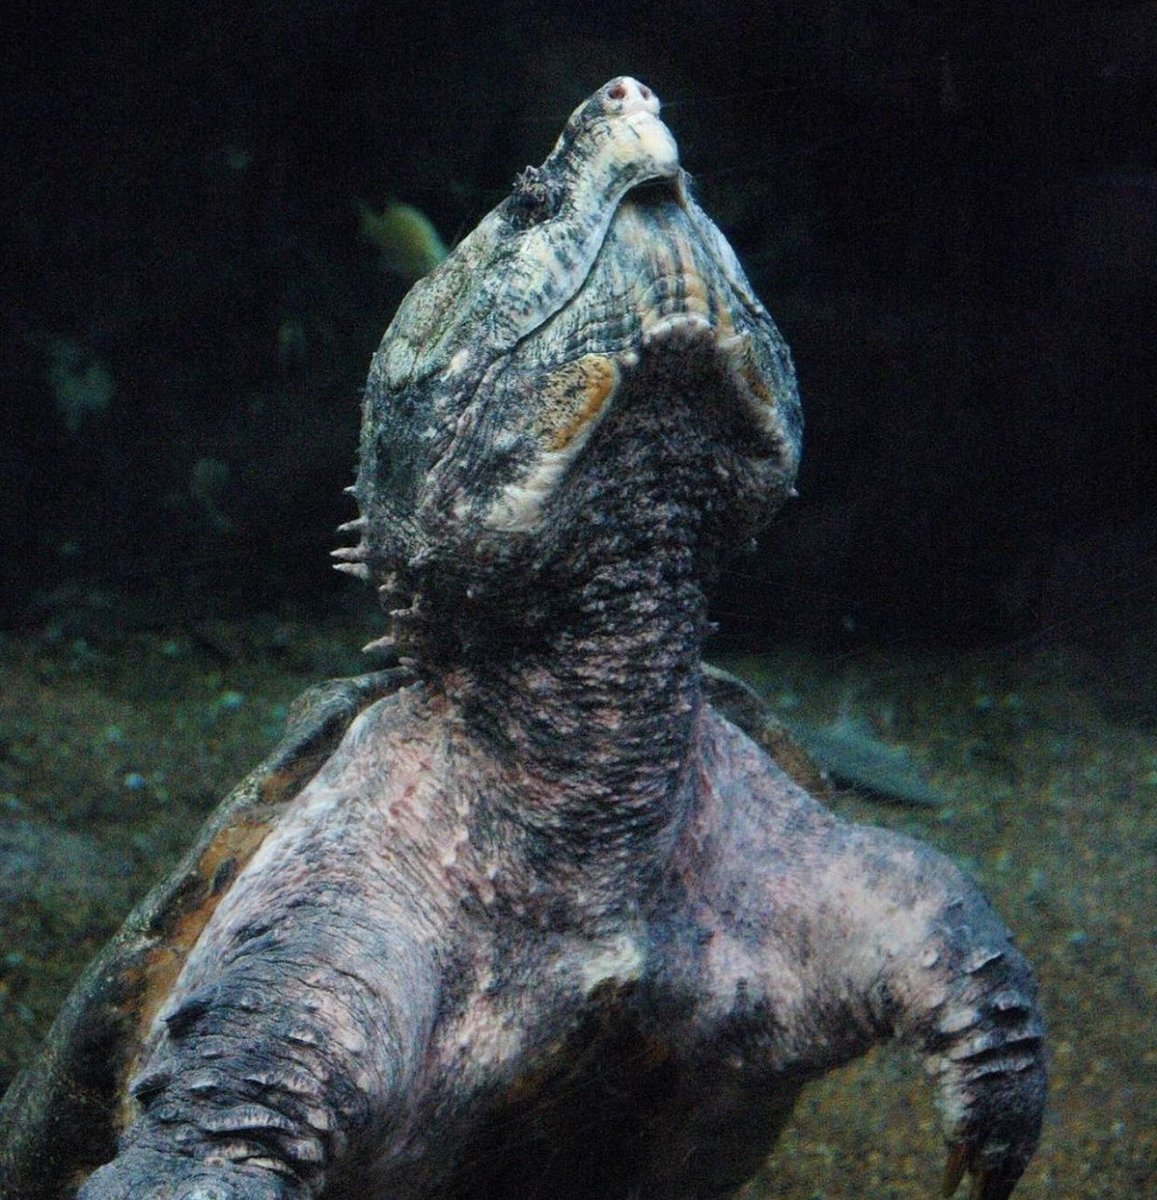 The Alligator Snapping Turtle is the largest freshwater turtle in North America and is often called the ‘dinosaur of the turtle world’ due to its spikey shell and scaly tail!